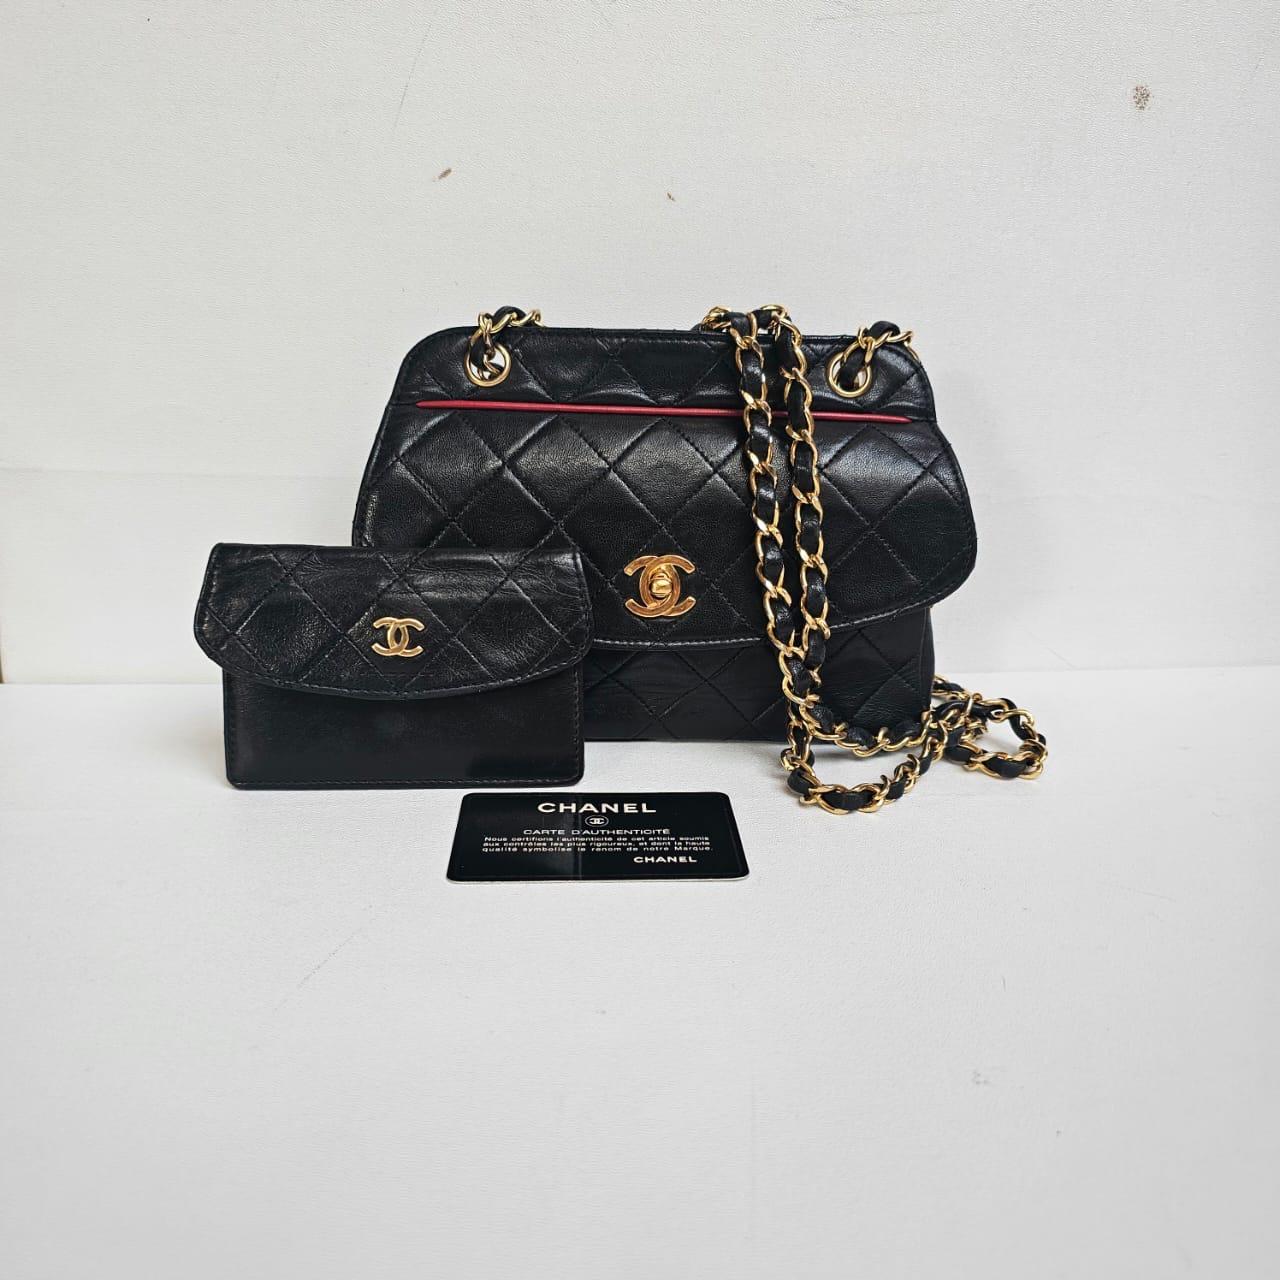 Vintage Chanel Black Lambskin Quilted Mini Flap Bag For Sale 7